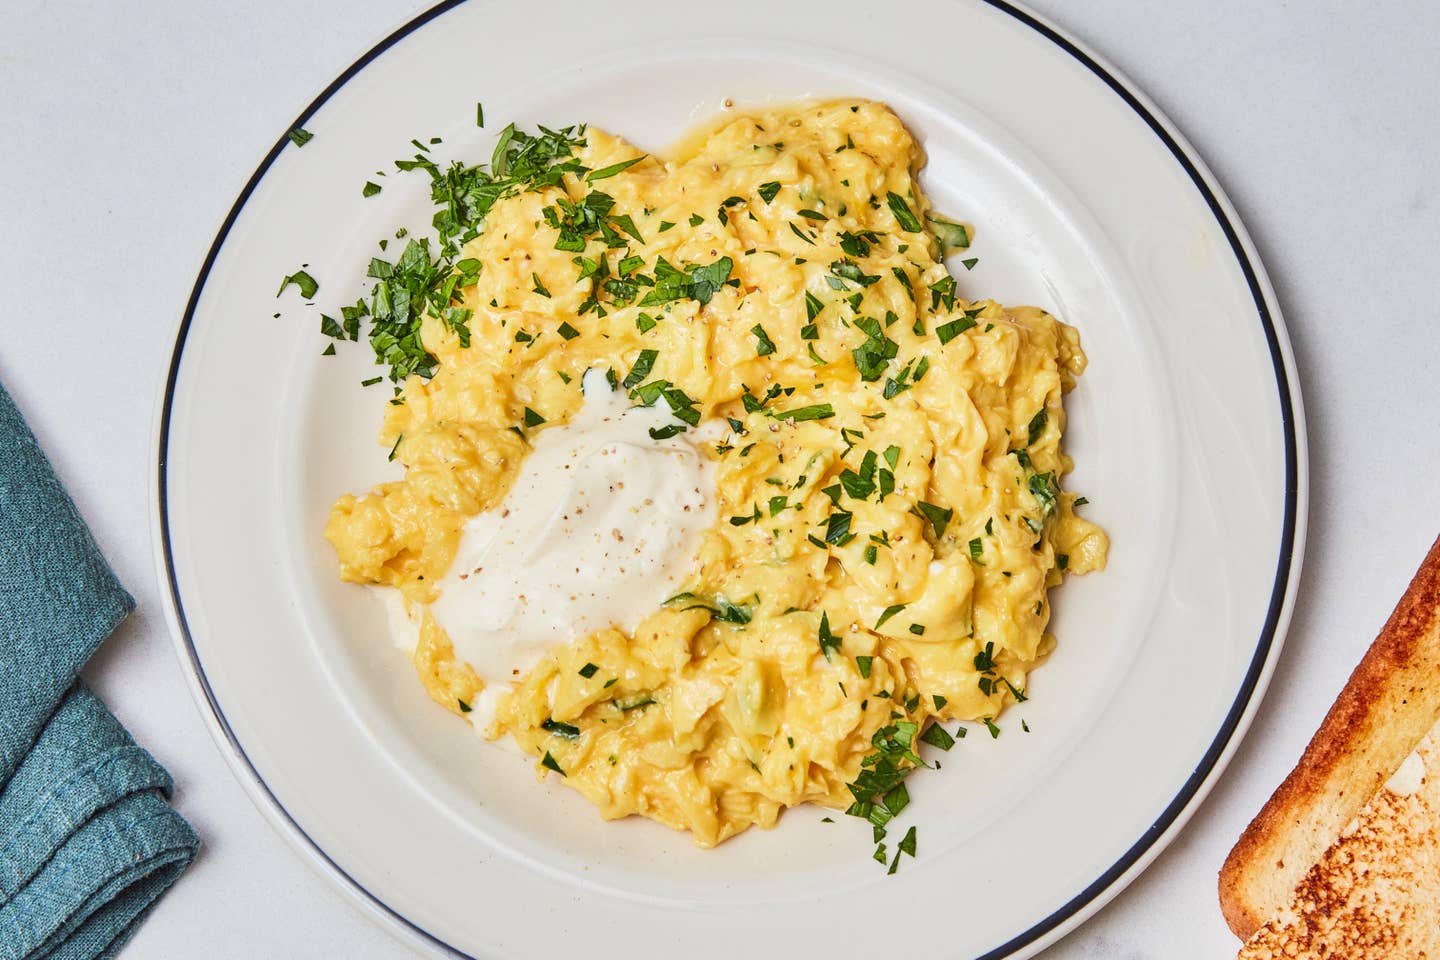 How to Make Scrambled Eggs Perfectly, Step by Step